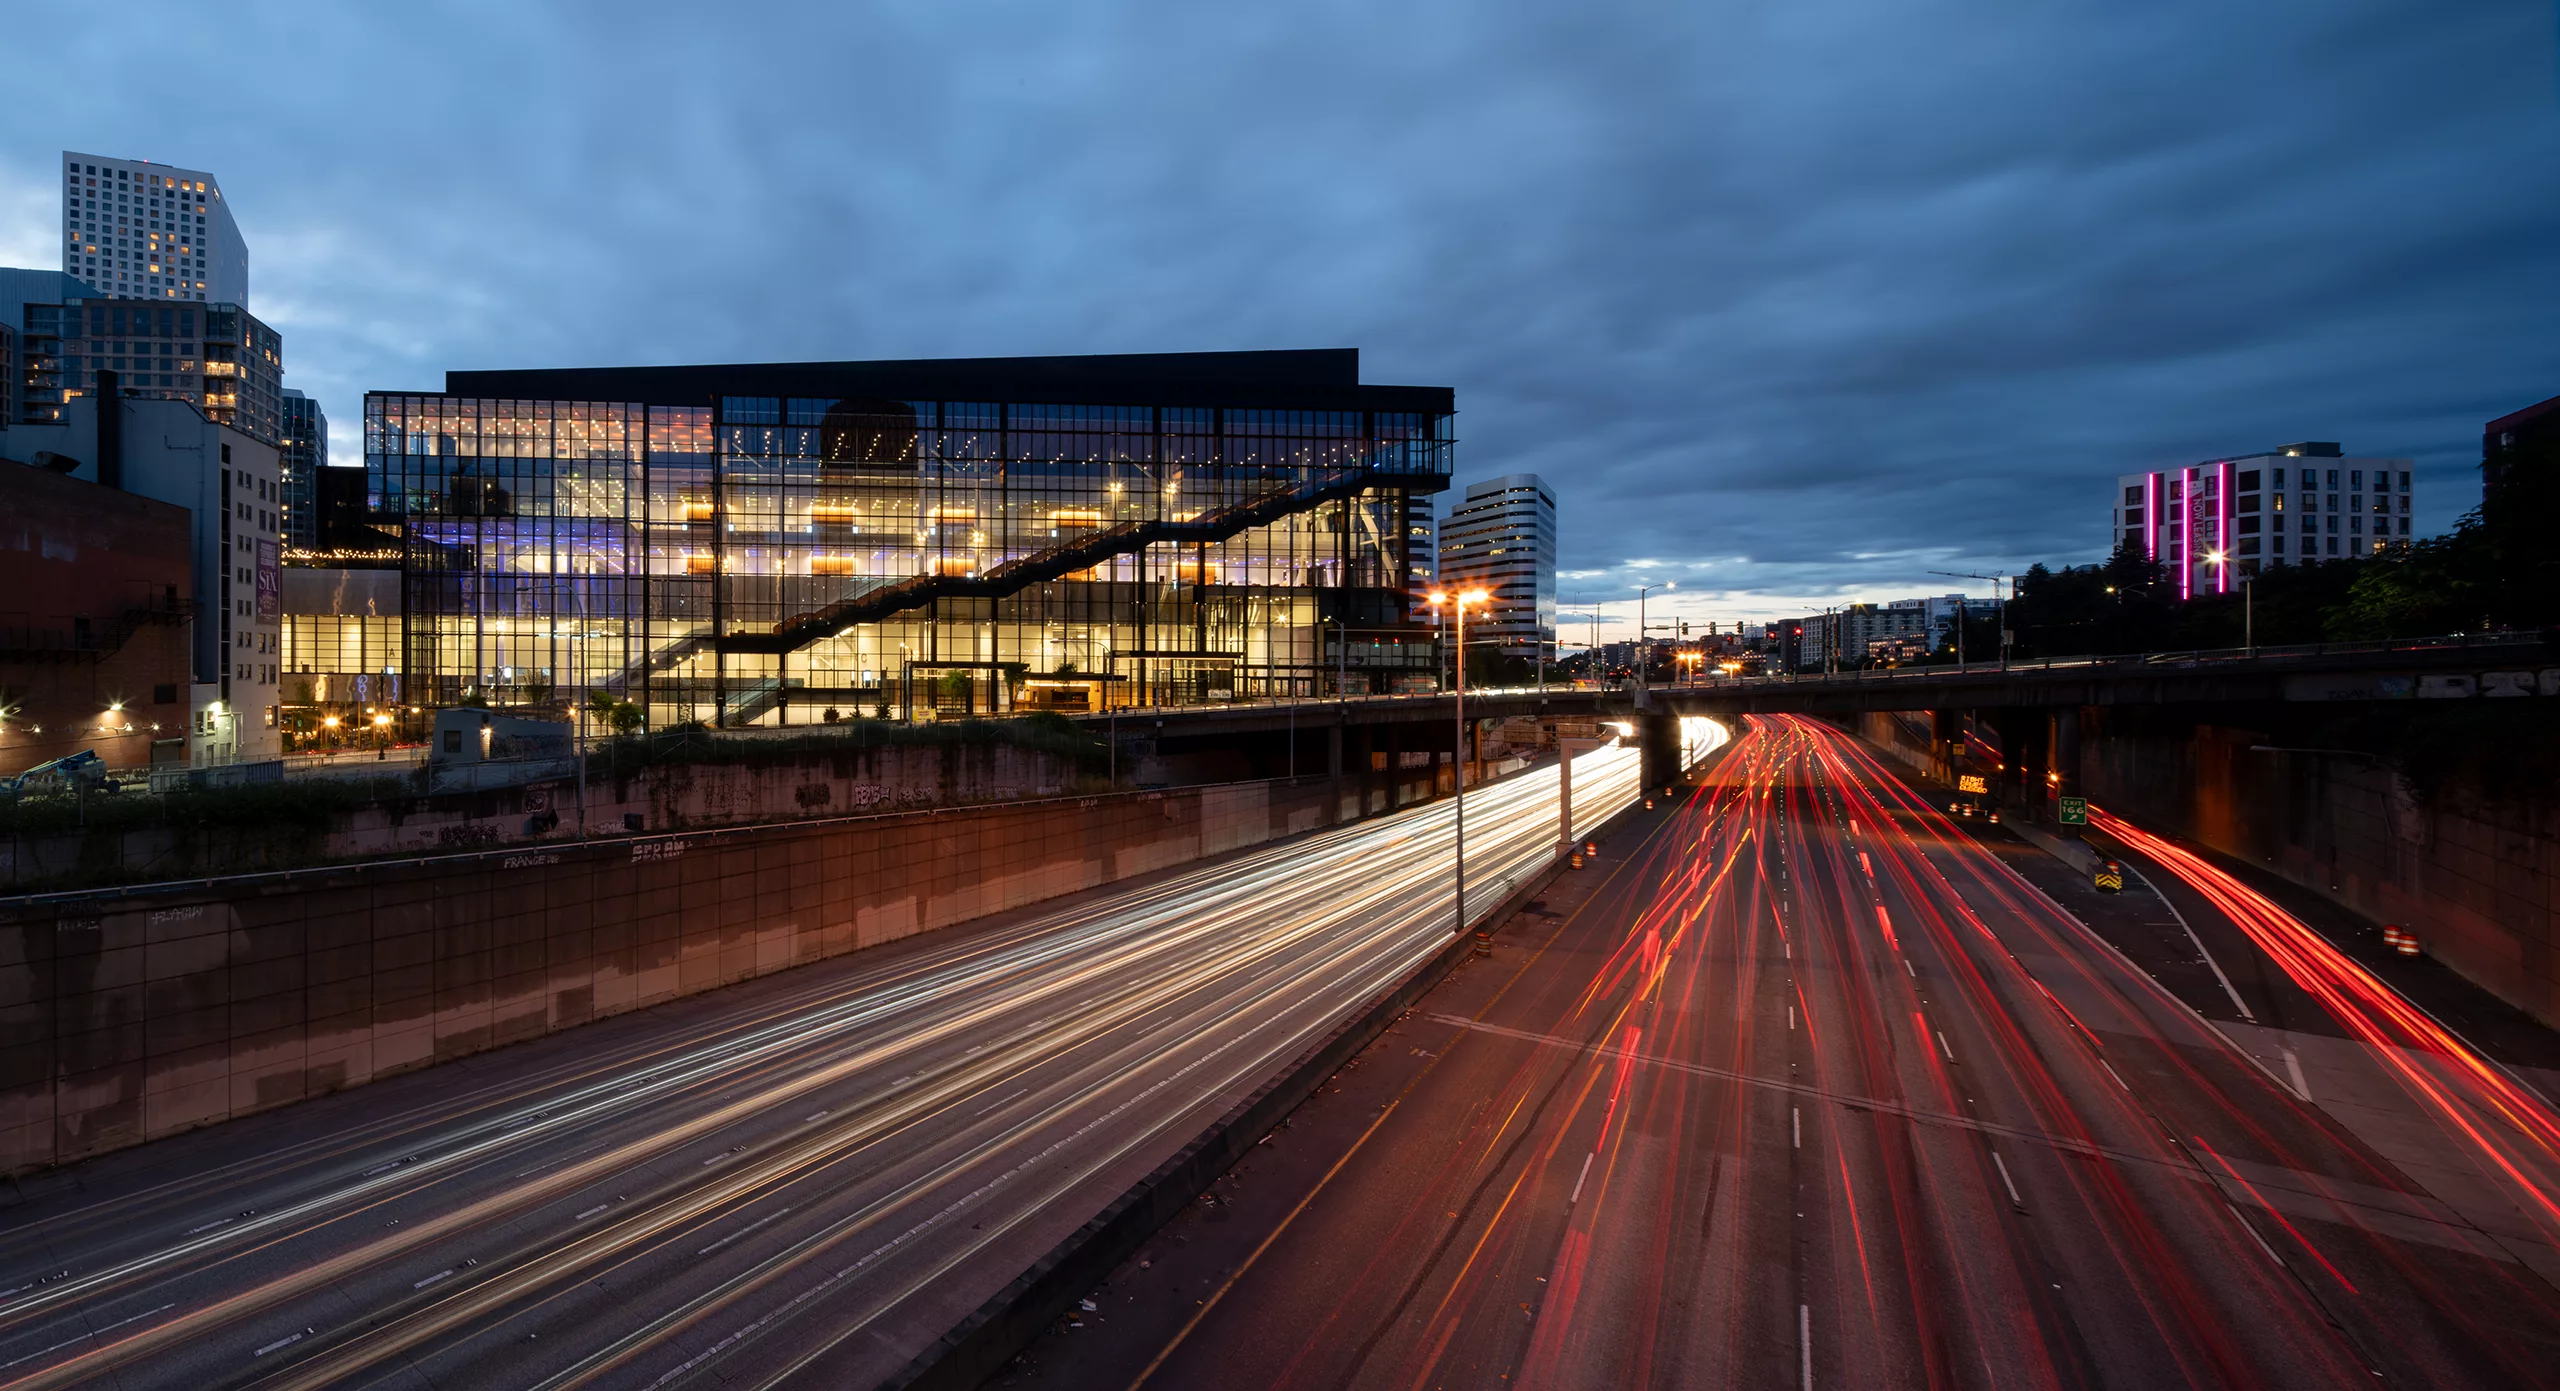 Exterior twilight view of the Seattle Convention Center Addition illuminated from within, featuring the Pine Street overpass and streaming headlights and taillights of vehicle traffic along Interstate 5